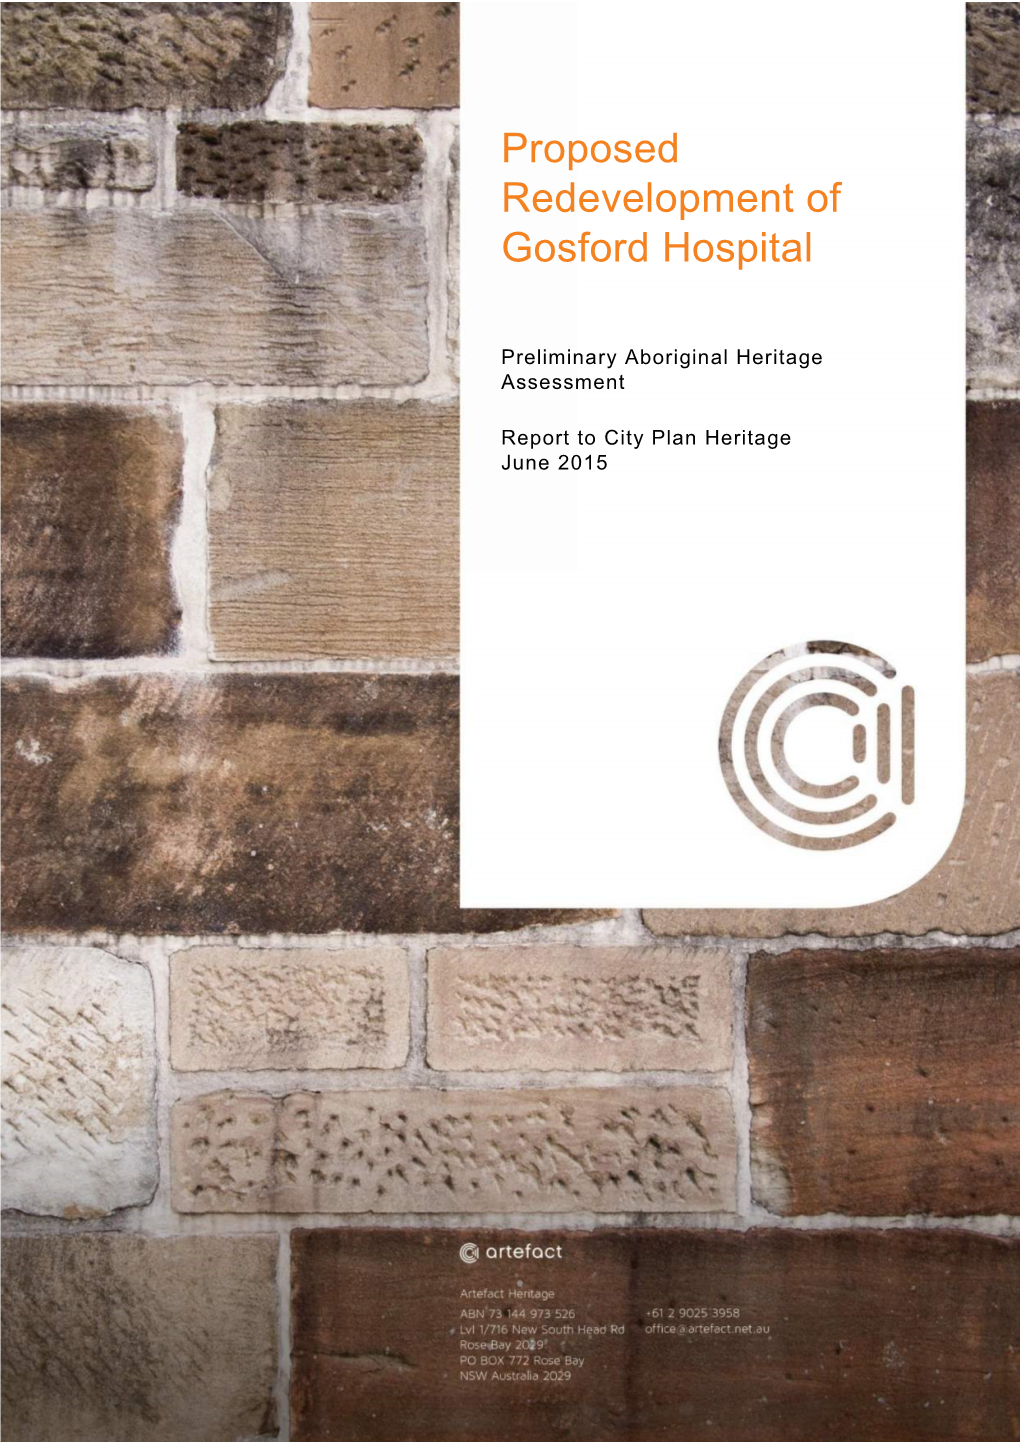 Proposed Redevelopment of Gosford Hospital